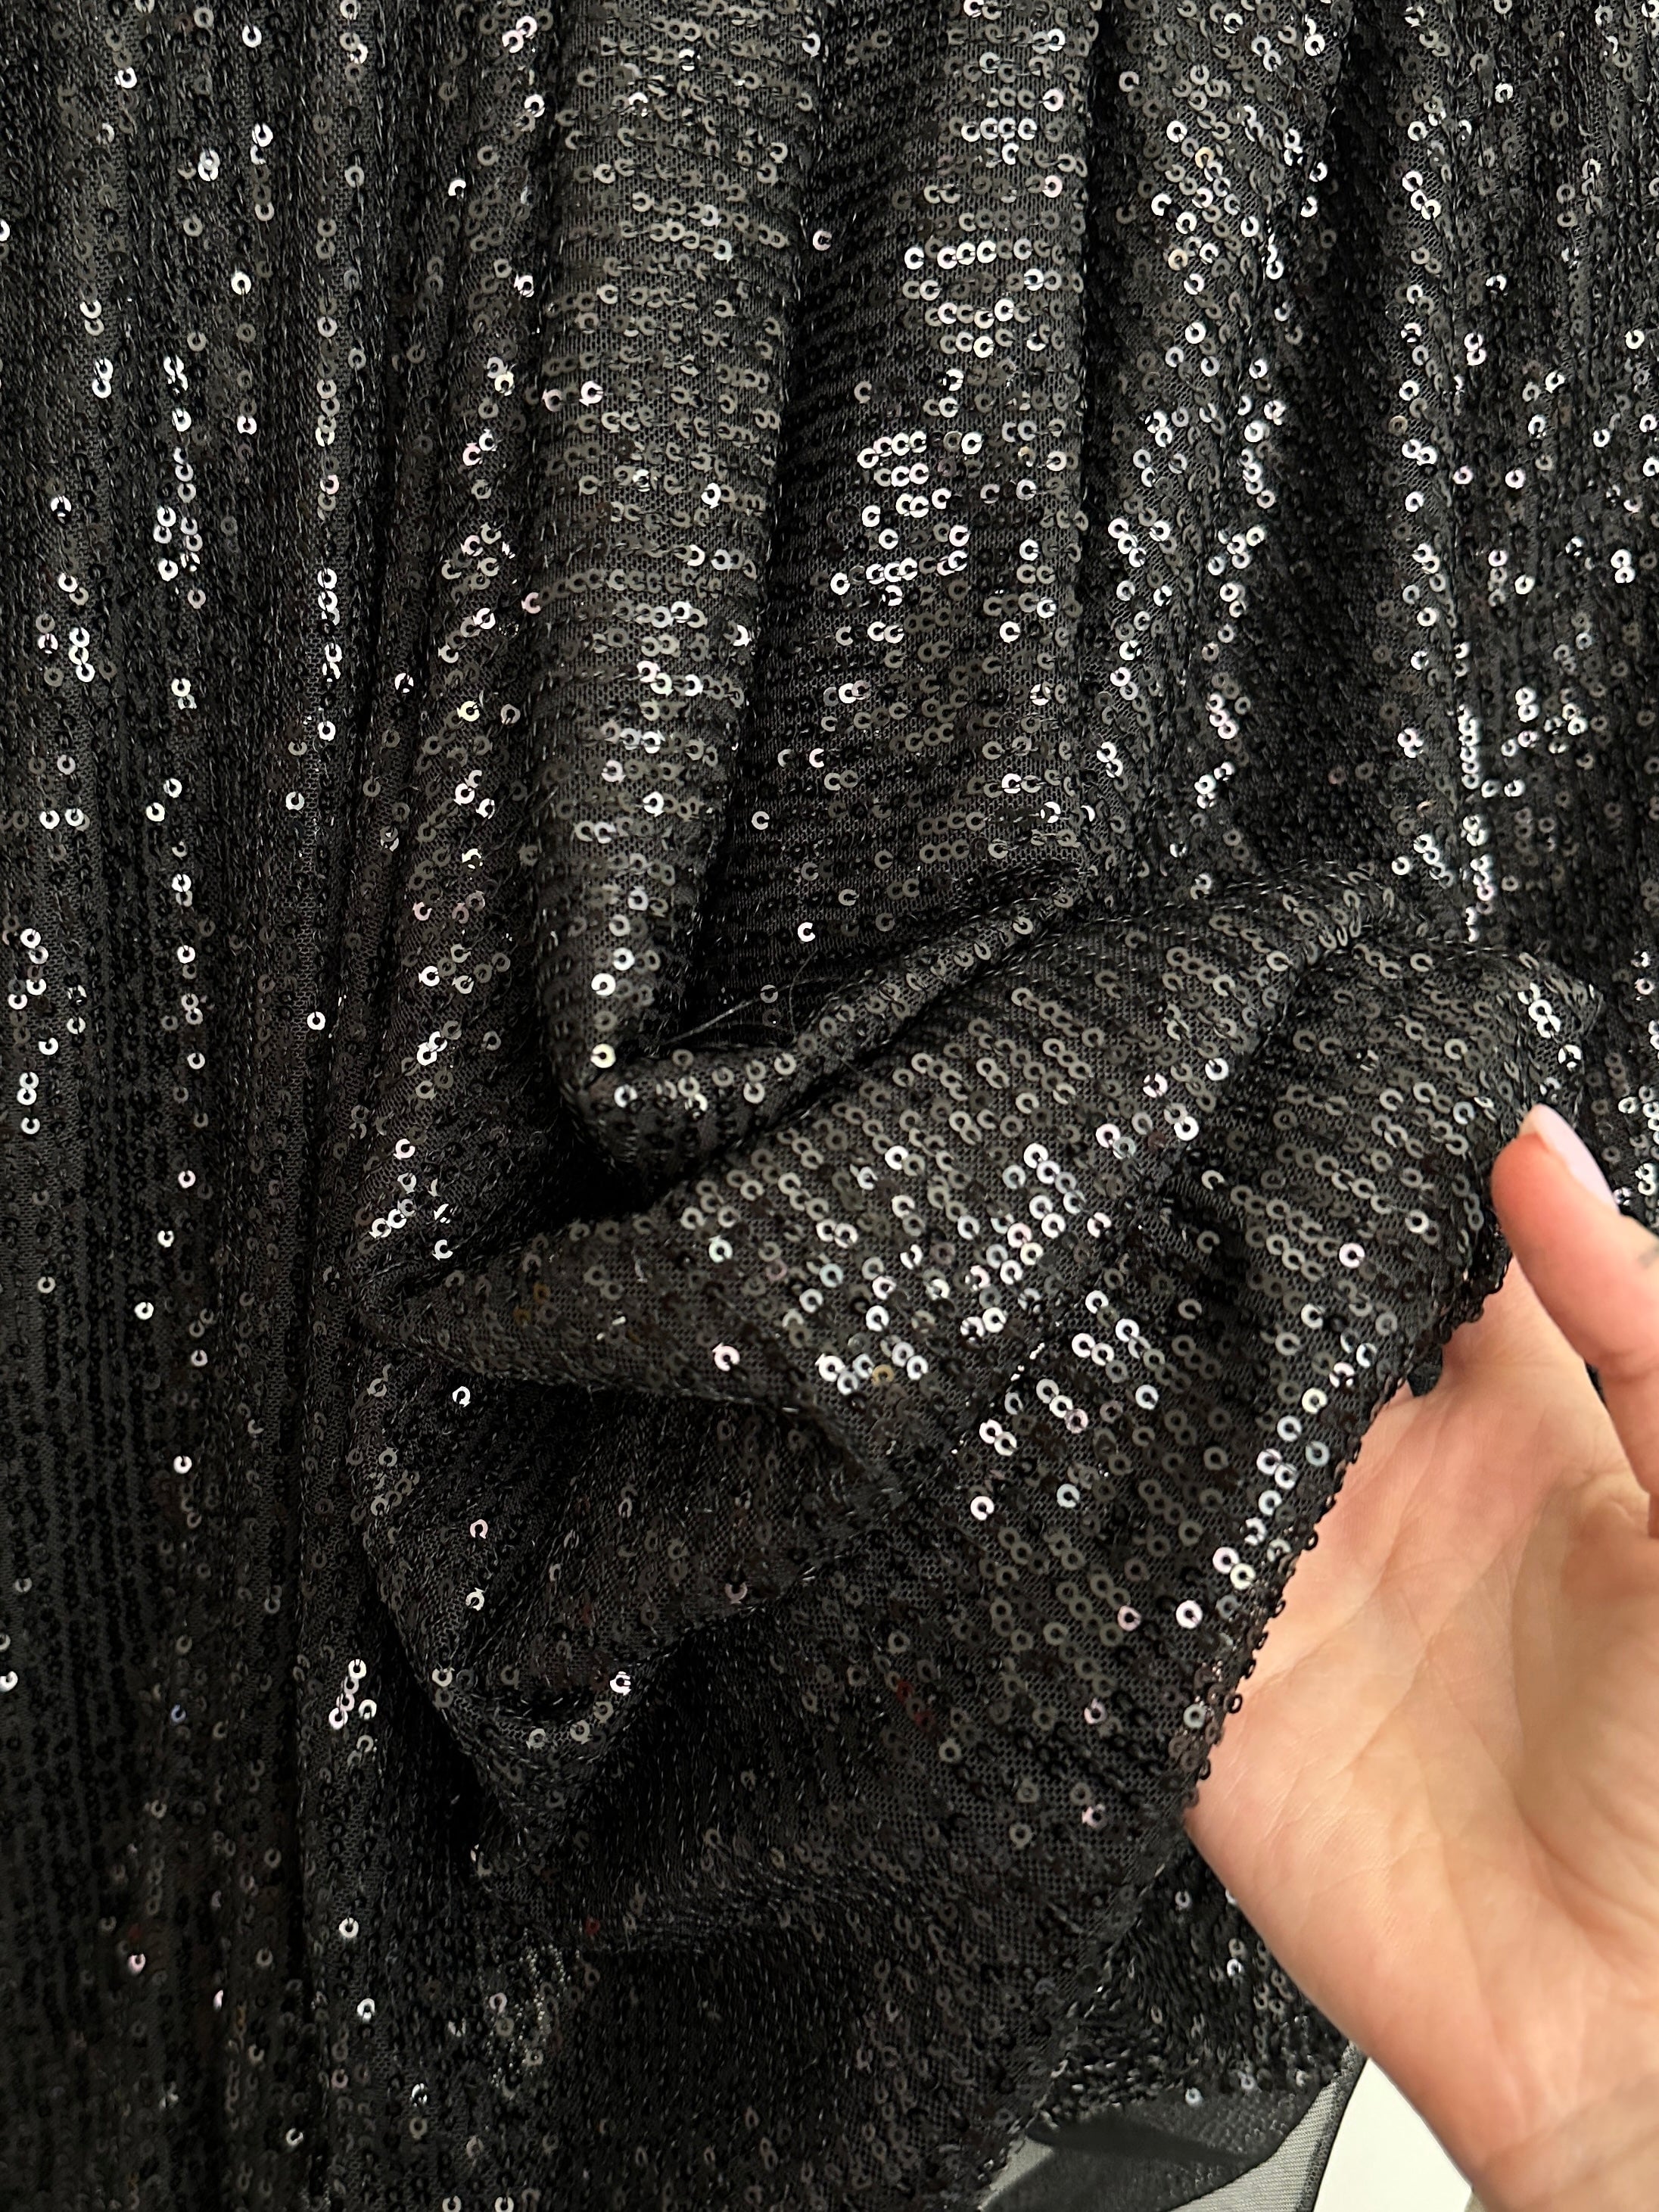 black super stretch sequin on mesh, dark grey sequin on mesh, jet black sequin on mesh, sequin on mesh for woman, sequin on mesh for bride, sequin on mesh on discount, sequin on mesh on sale, premium sequin on mesh, kiki textile sequin on mesh, sequin on mesh for party wear 